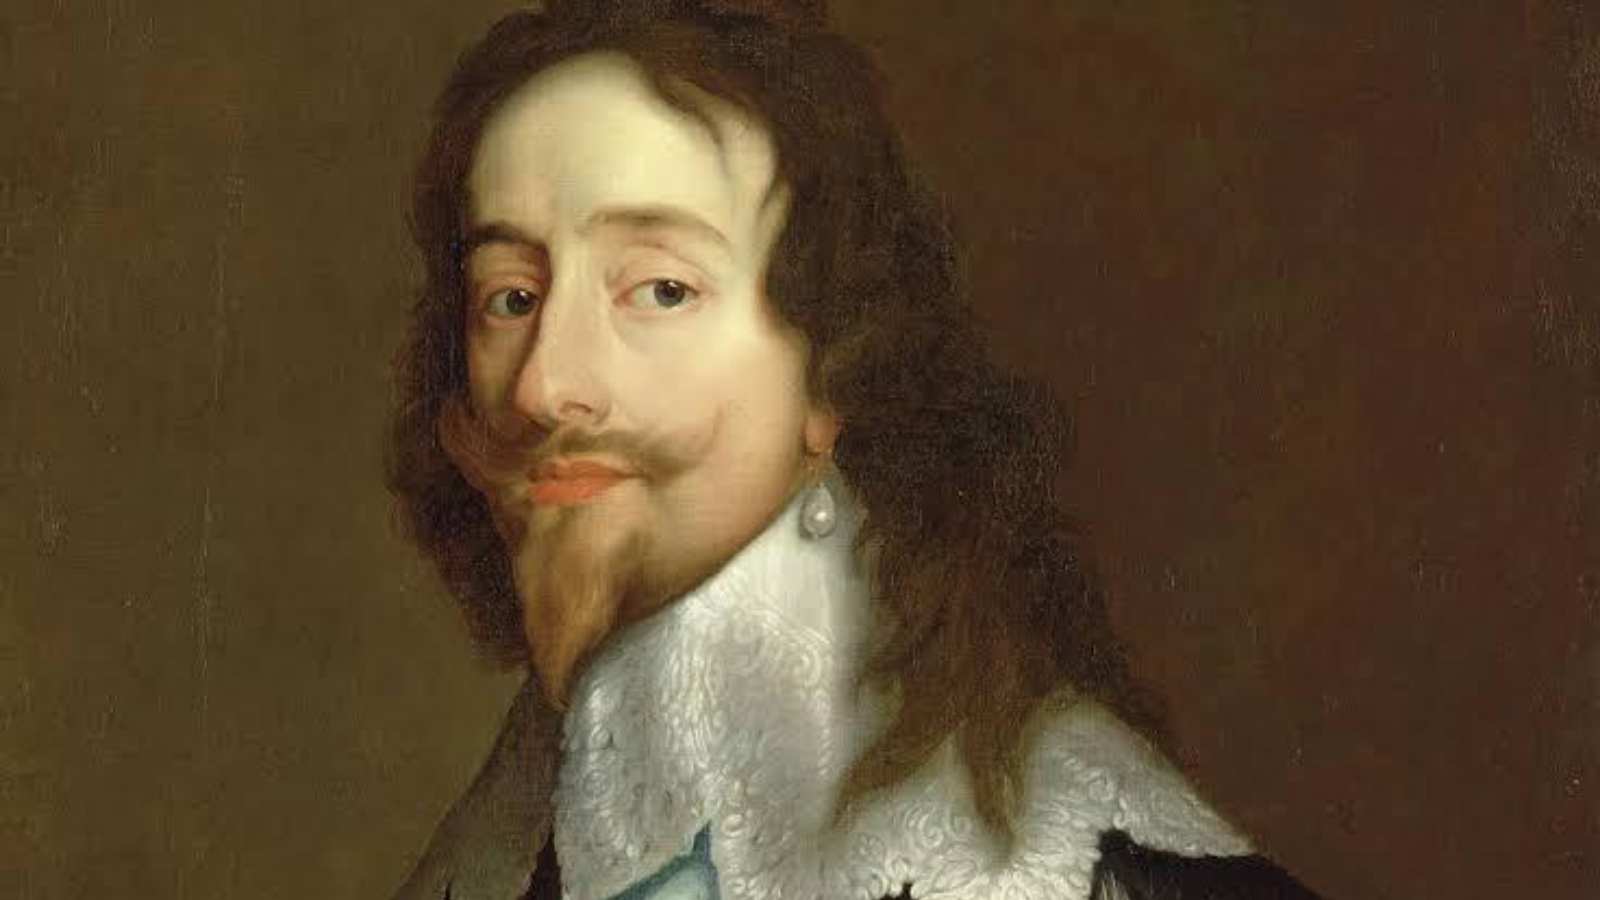 Who is King Charles I? How is he associated with King Charles III? 